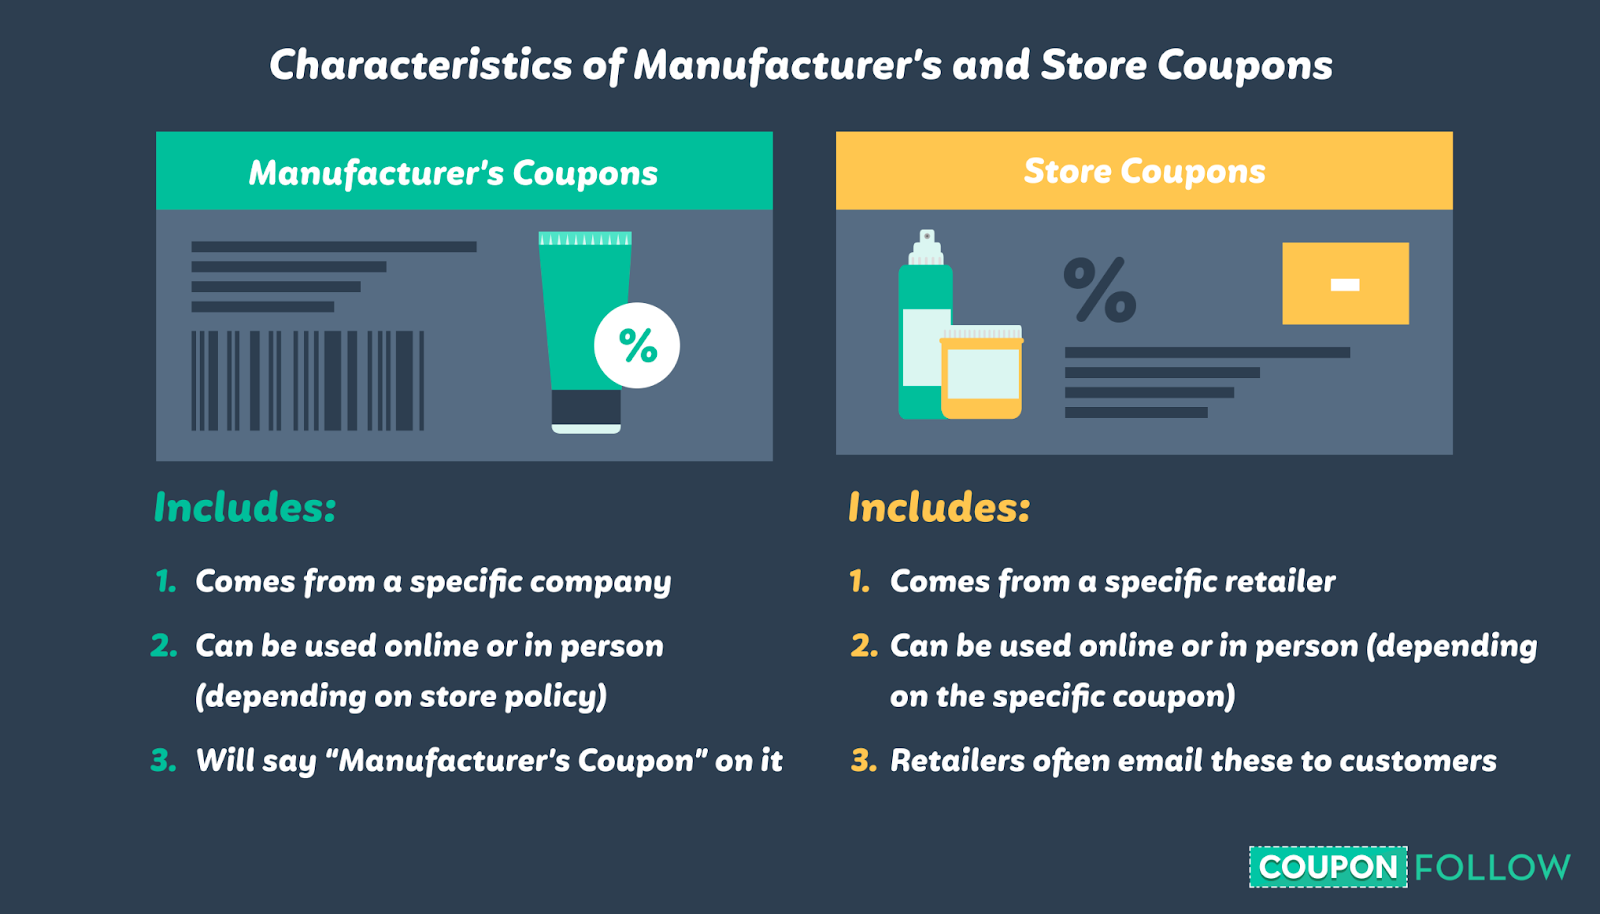 Illustration highlighting the key differences between a store coupon and a manufacturer’s coupon